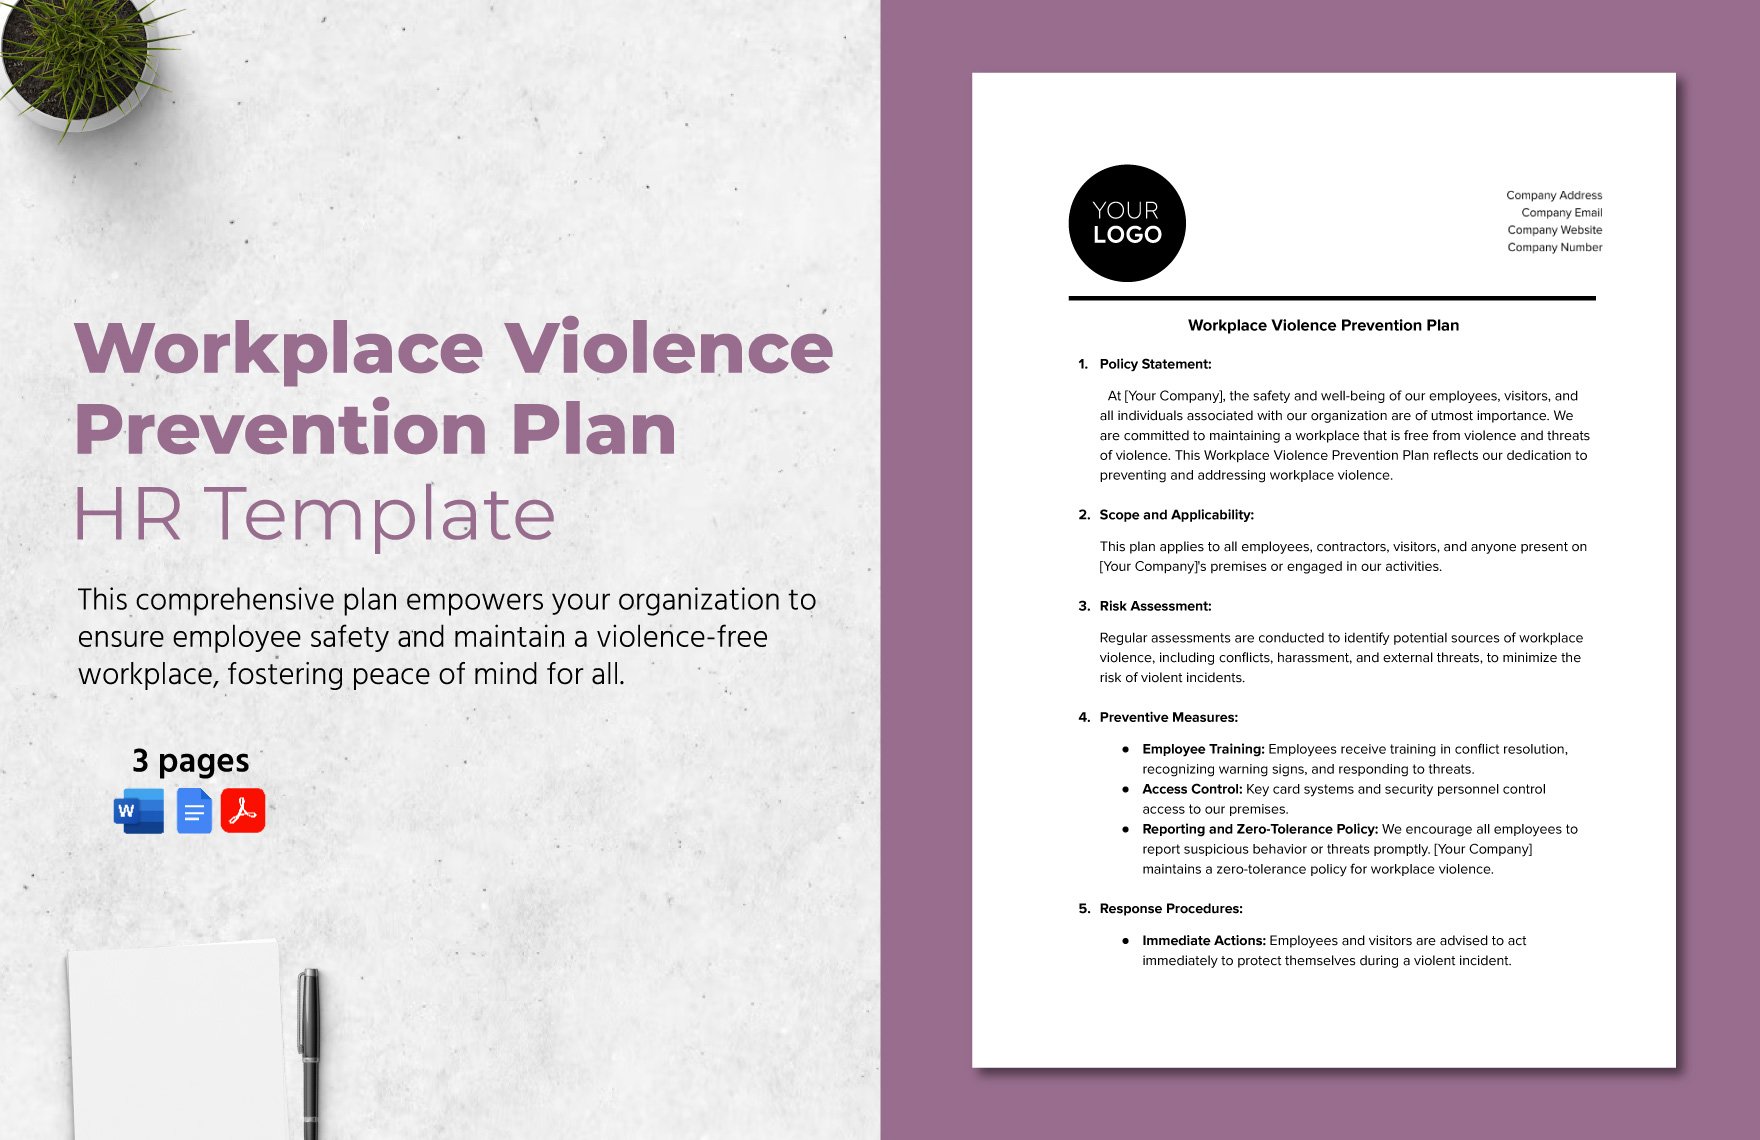 Workplace Violence Prevention Plan HR Template in Word, Google Docs, PDF